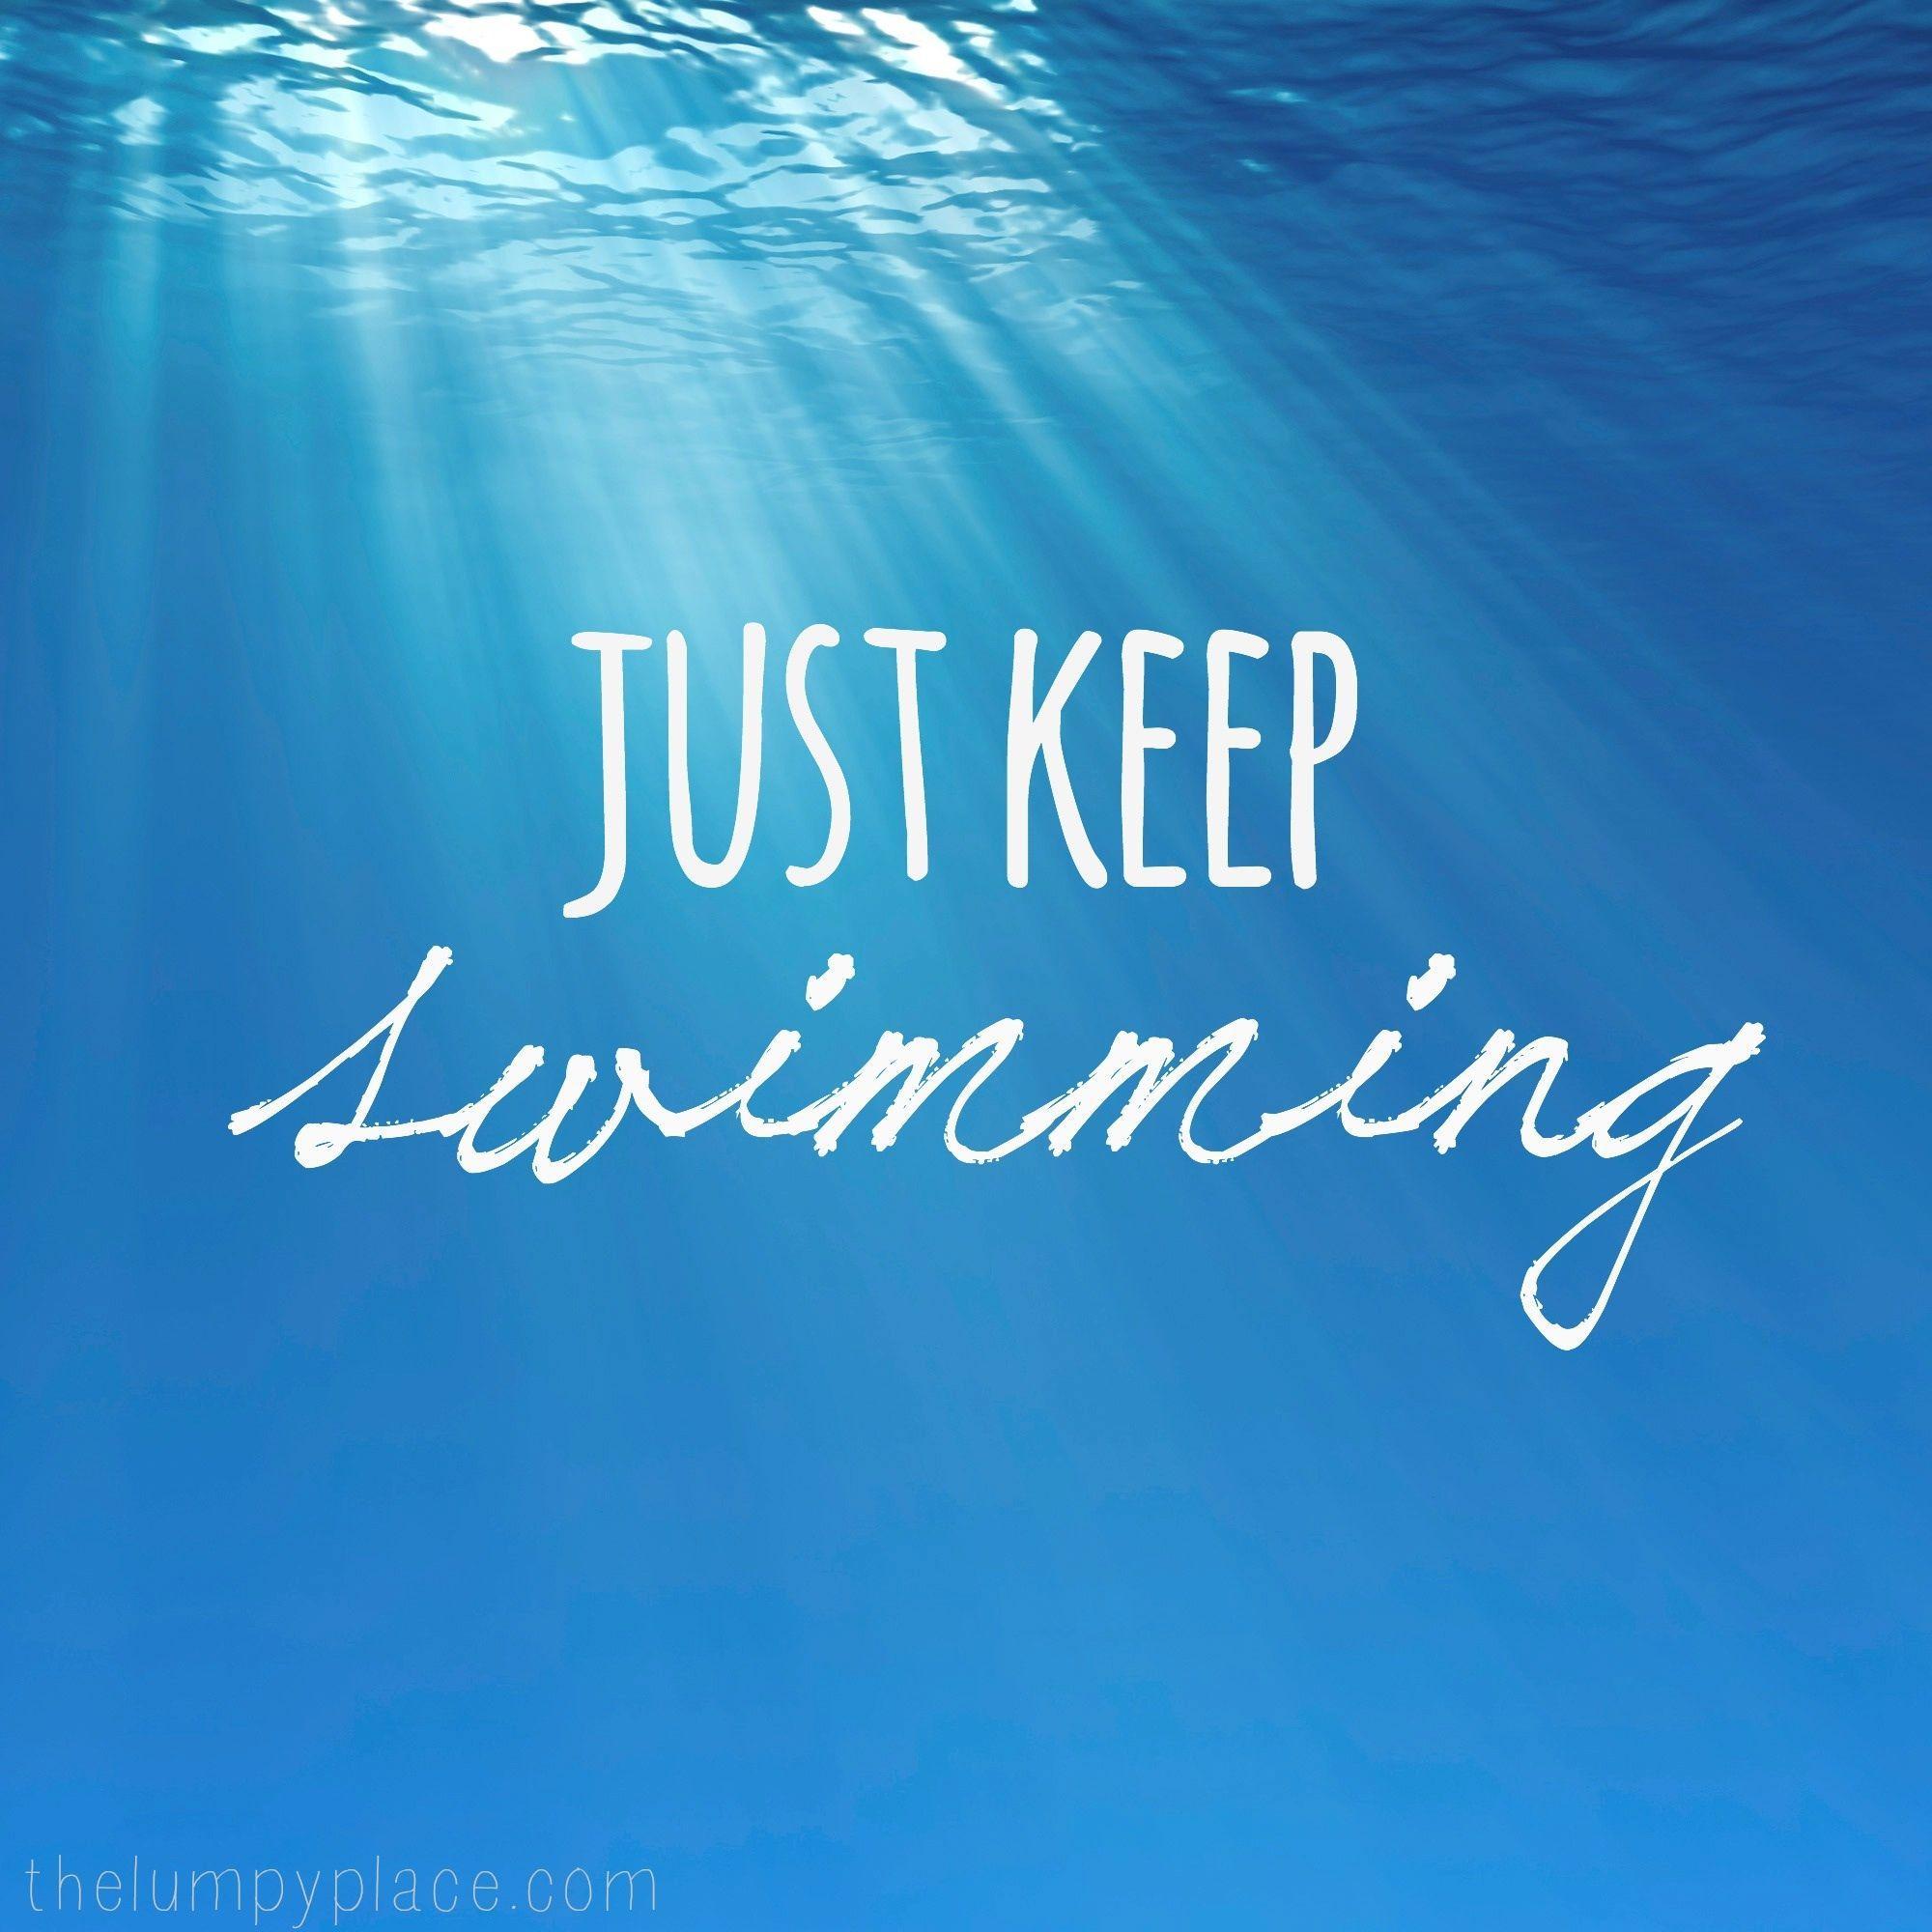 Swimming Quotes Wallpapers Top Free Swimming Quotes Backgrounds Images, Photos, Reviews